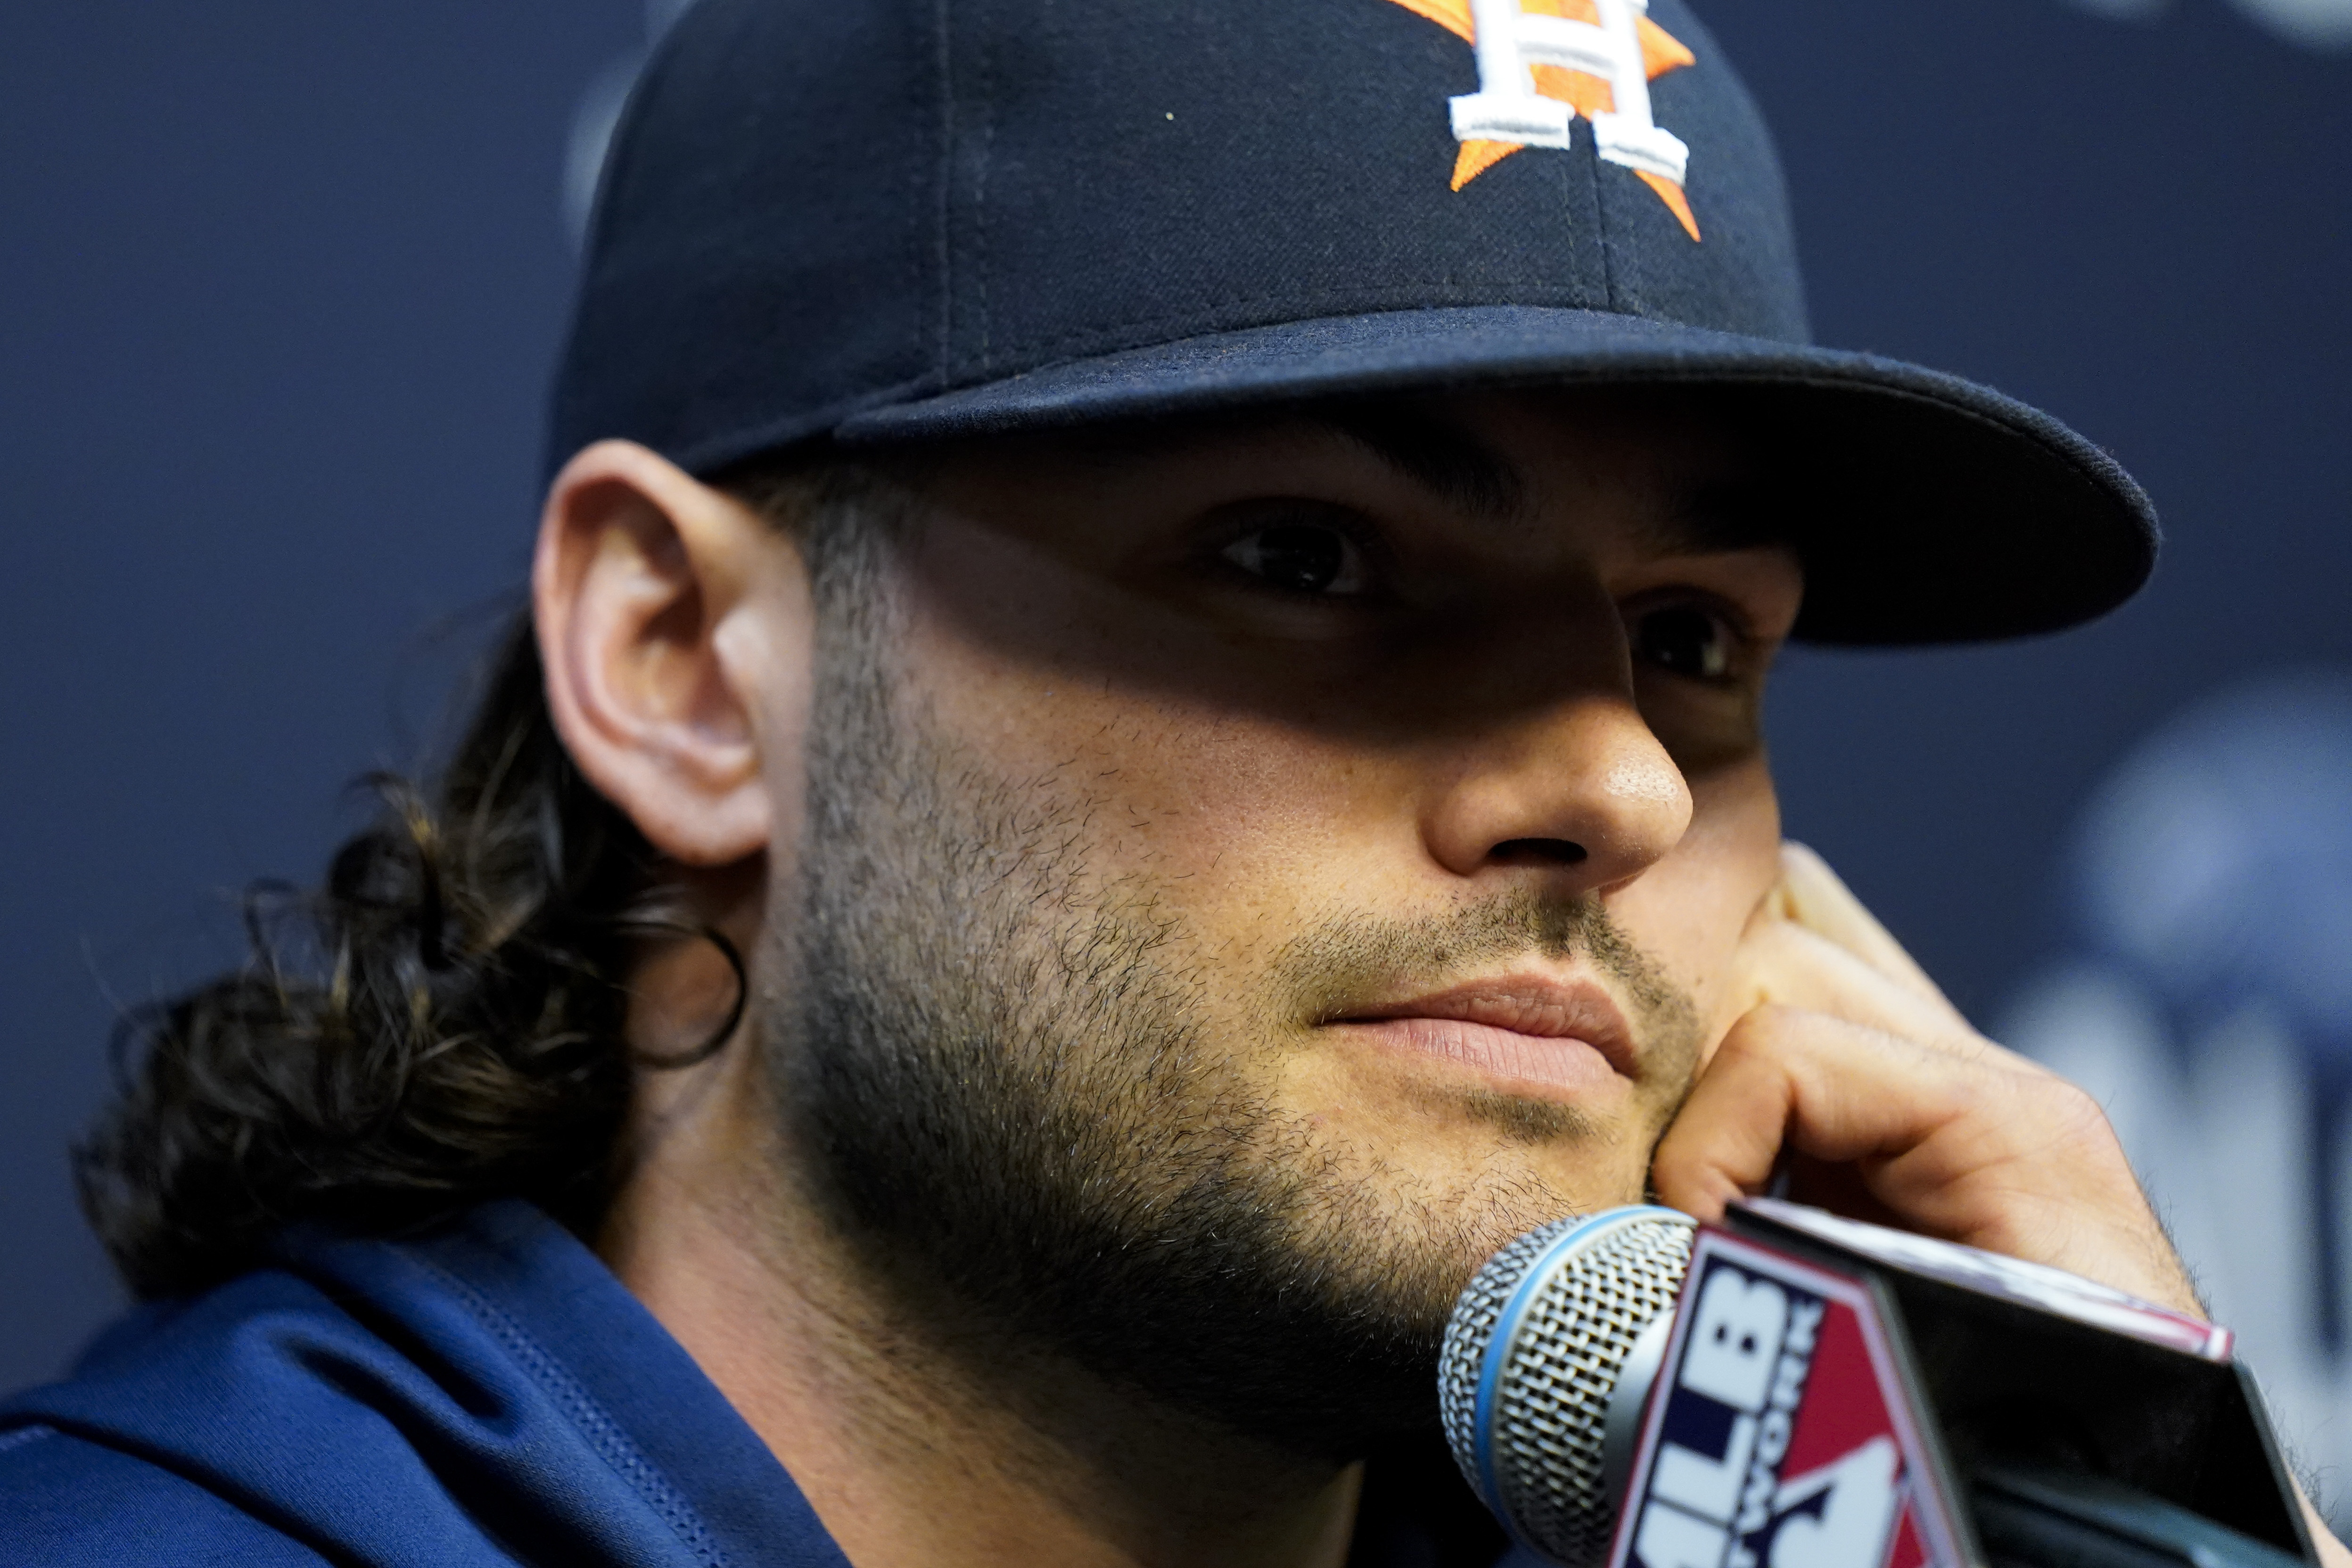 Lance McCullers Jr Bury Me In The H Houston Astros Baseball